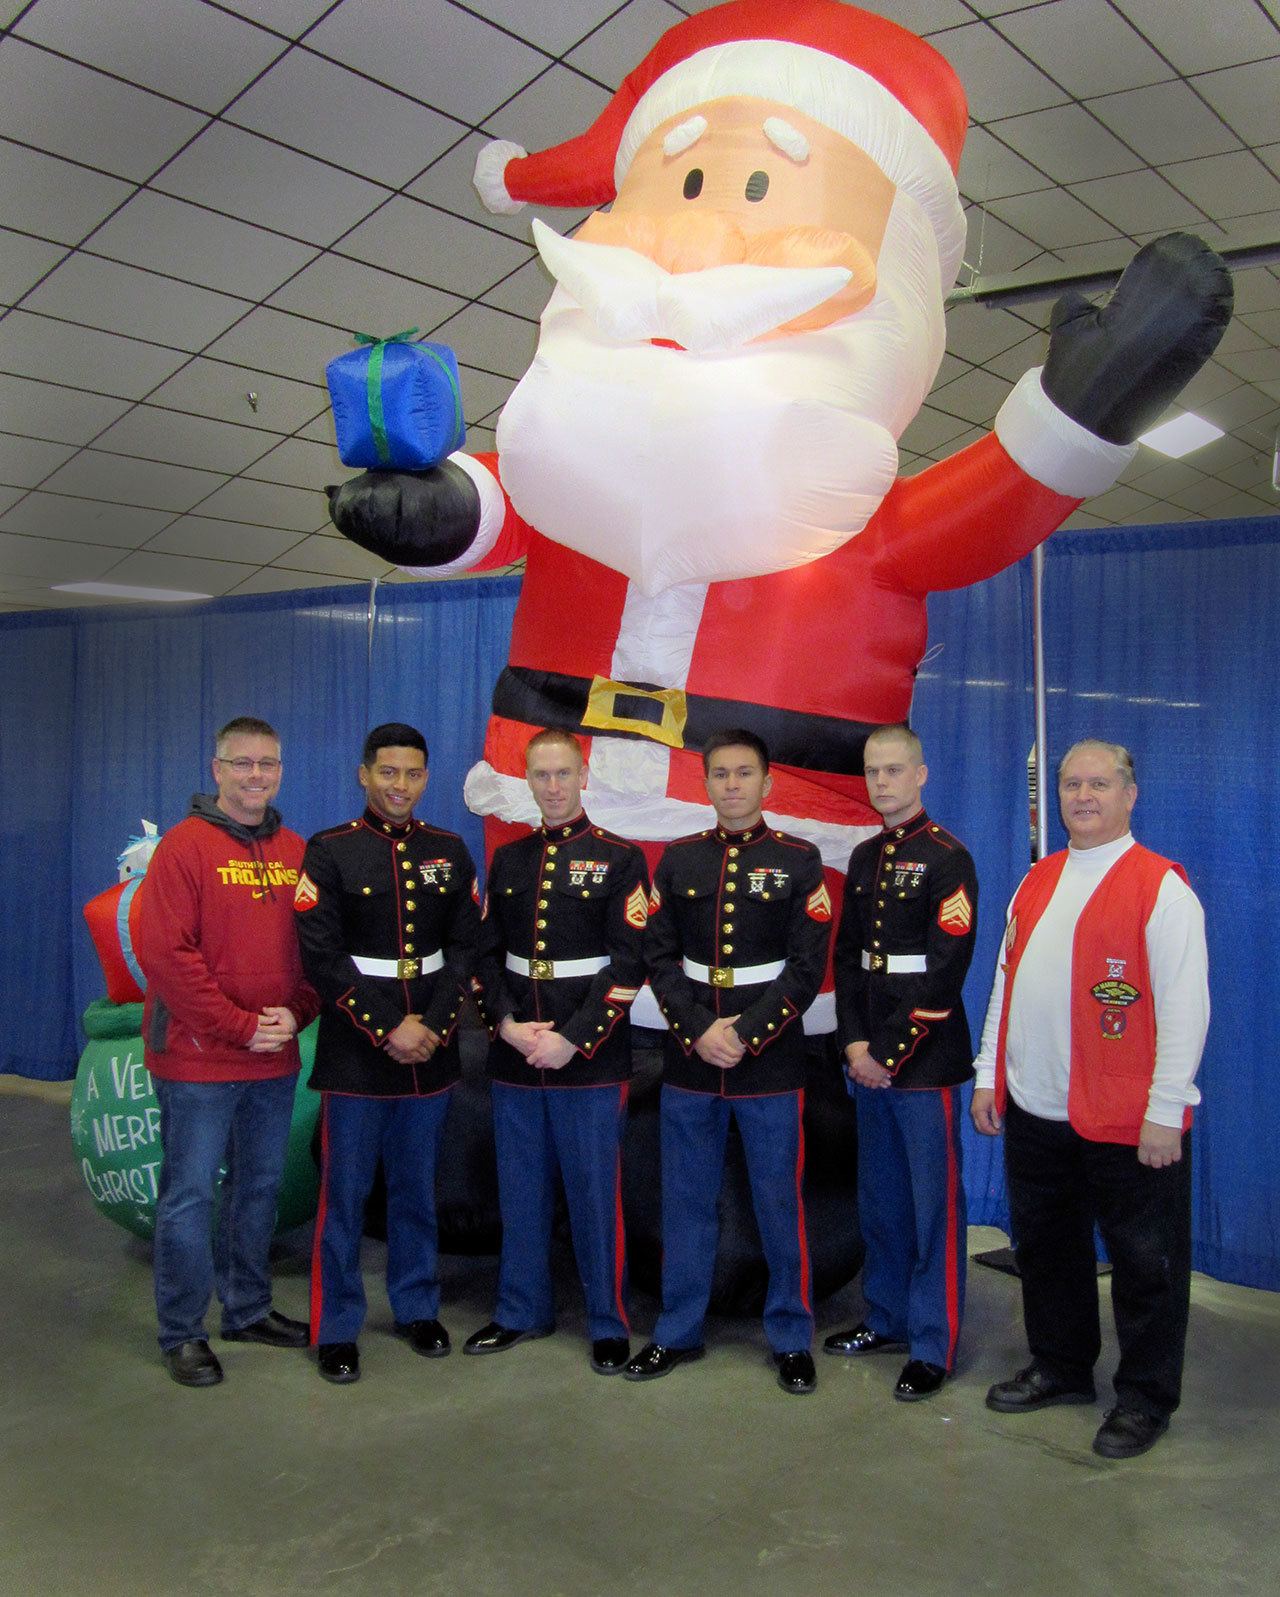 Volunteering with Toys for Tots in Kitsap County: from left, MSgt. Jason Selby (ret.), Cpl. Jairo Garcia, SSgt. Nate Gilbert, Cpl. Abran Baramila, Sgt. Joshua Rowell, and Sgt. Vince Smith (ret.).                                Terryl Asla/                                Kitsap News Group